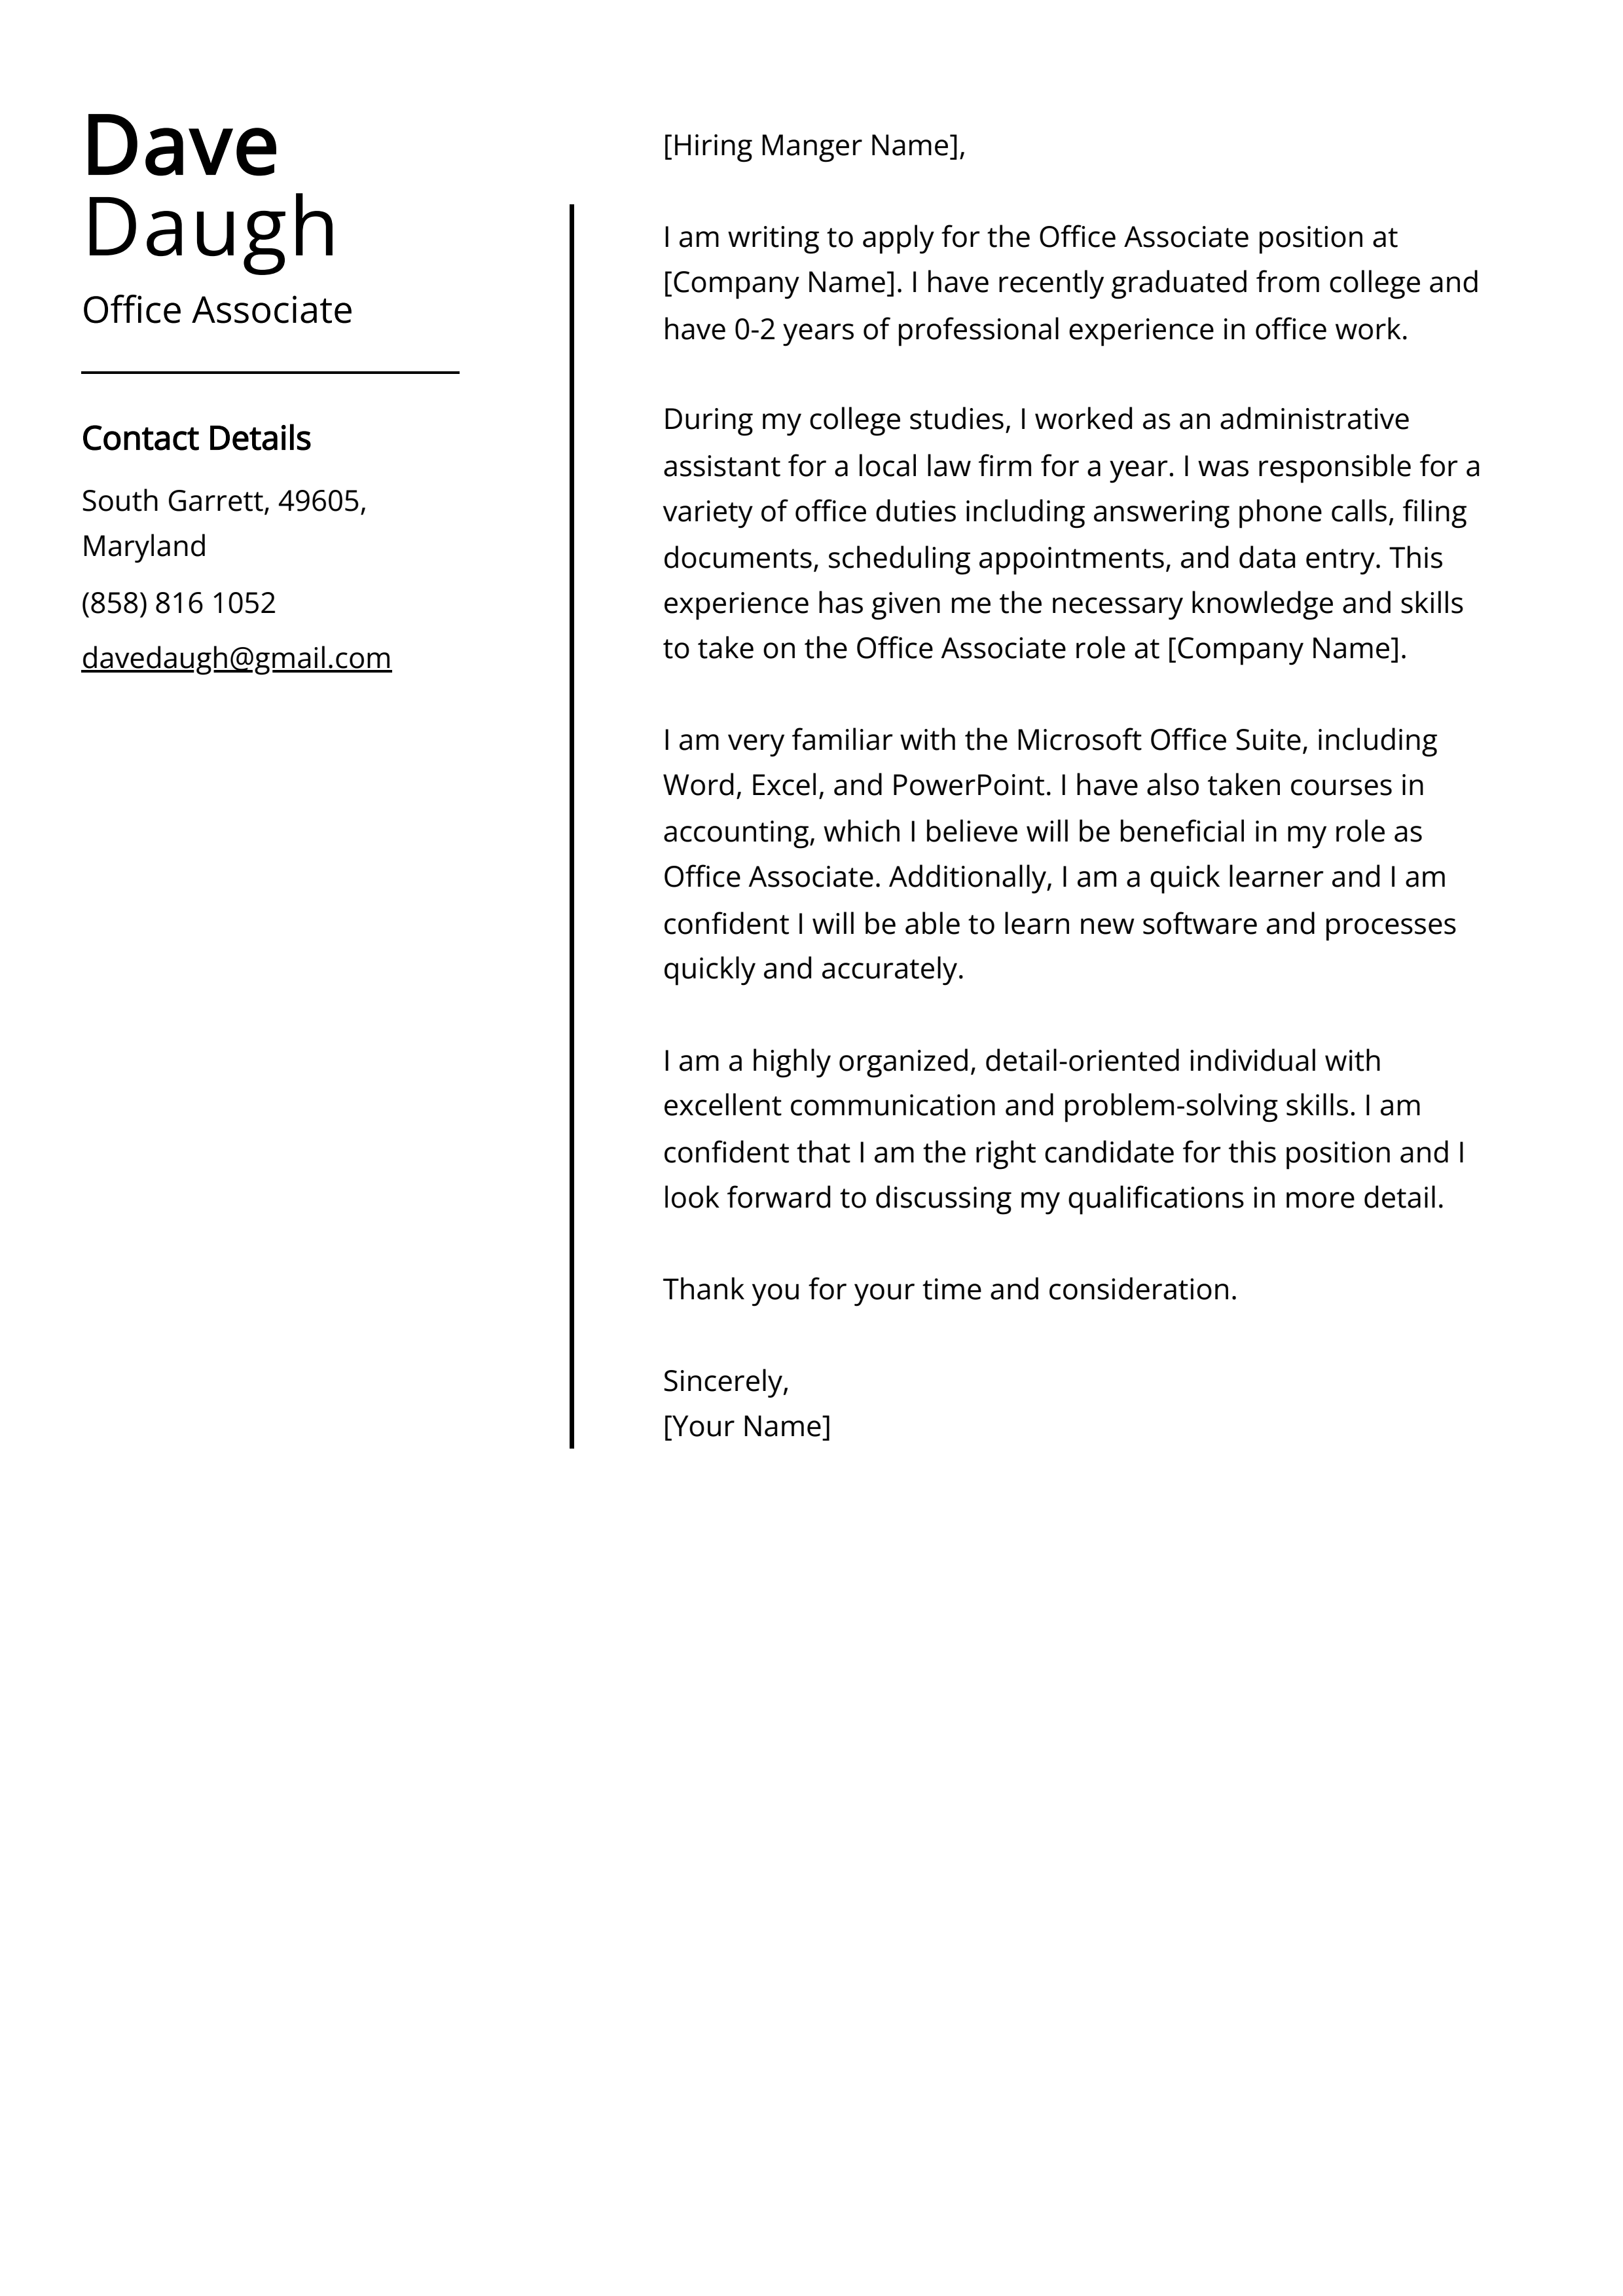 Office Associate Cover Letter Example